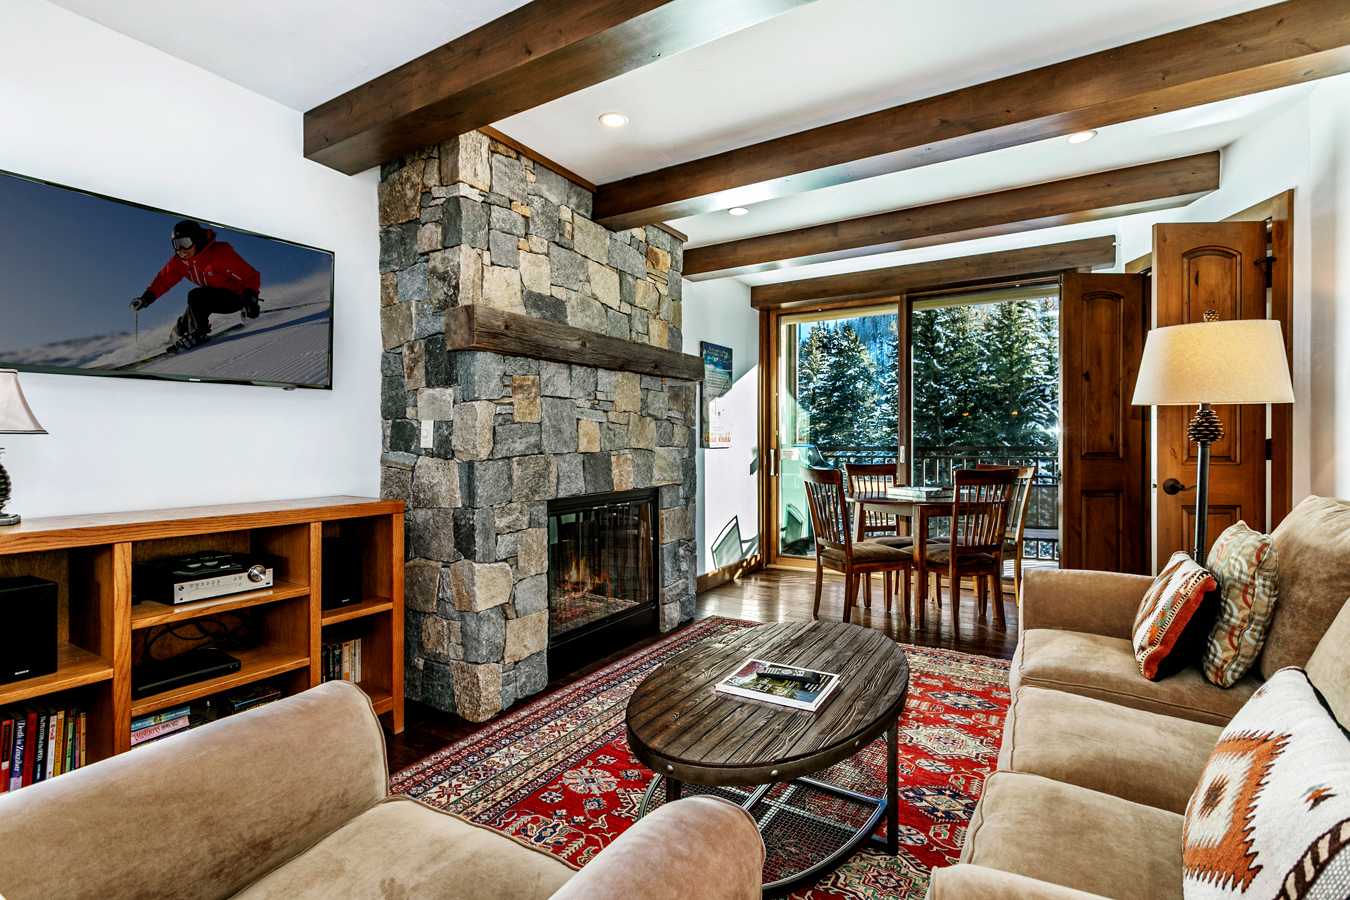 Individually decorated Antlers at Vail guest suites range from one to four bedrooms, awarded Vail Valley’s highest Platinum ranking, and include separate living areas, kitchens and private balconies.